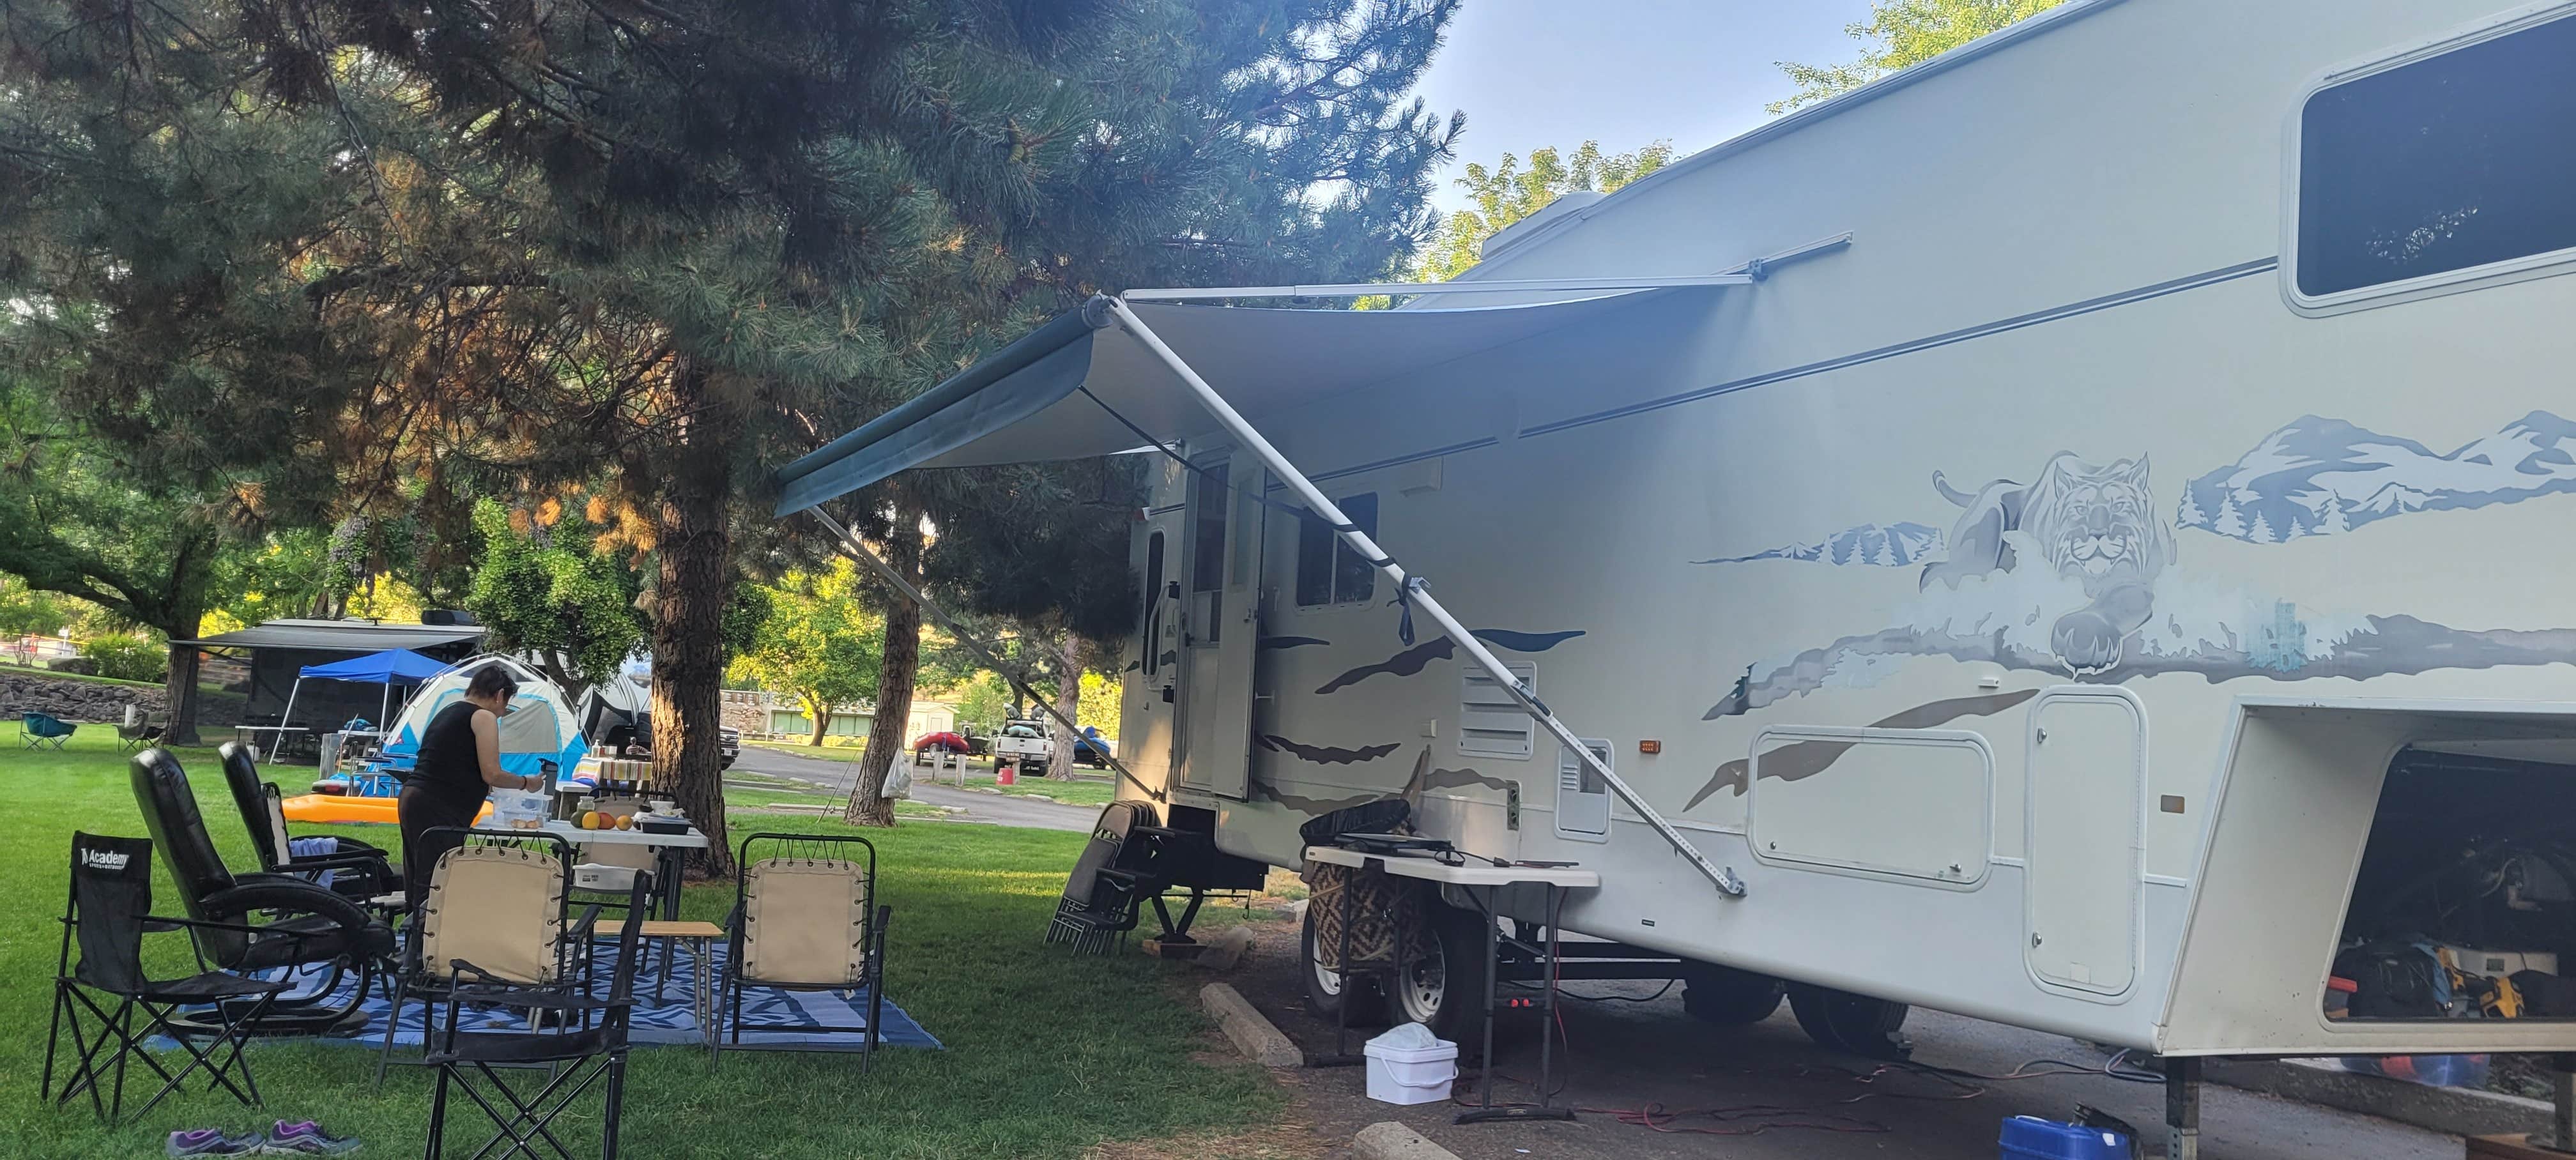 Camper submitted image from Hells Canyon Recreation Area Copperfield Campground - 1